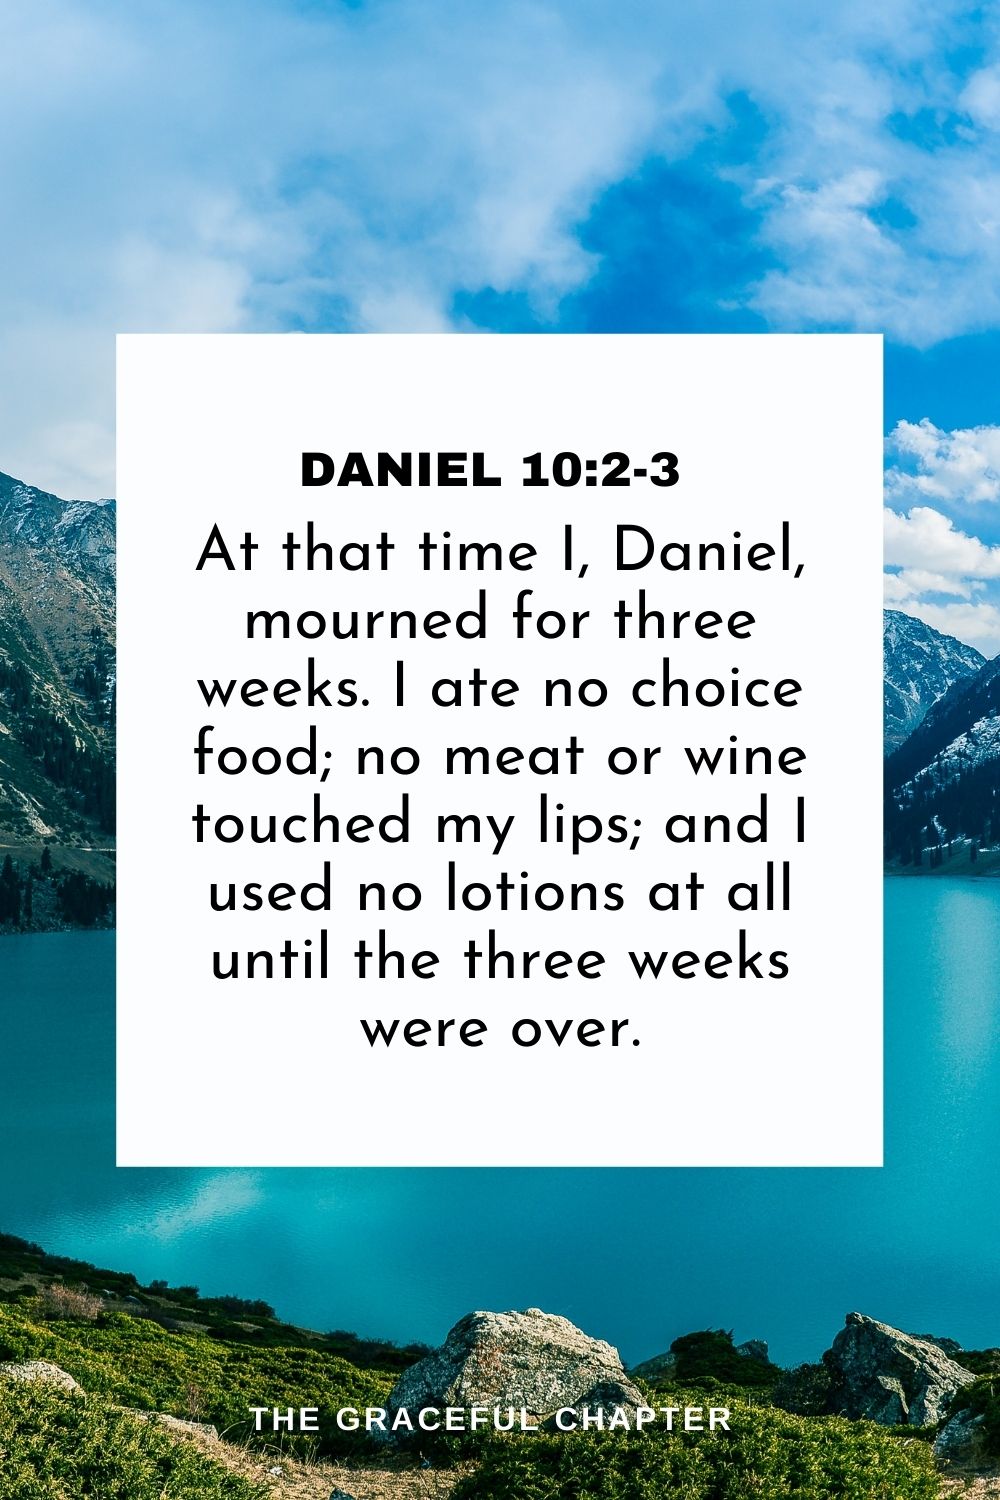 At that time I, Daniel, mourned for three weeks. I ate no choice food; no meat or wine touched my lips; and I used no lotions at all until the three weeks were over. Daniel 10:2-3